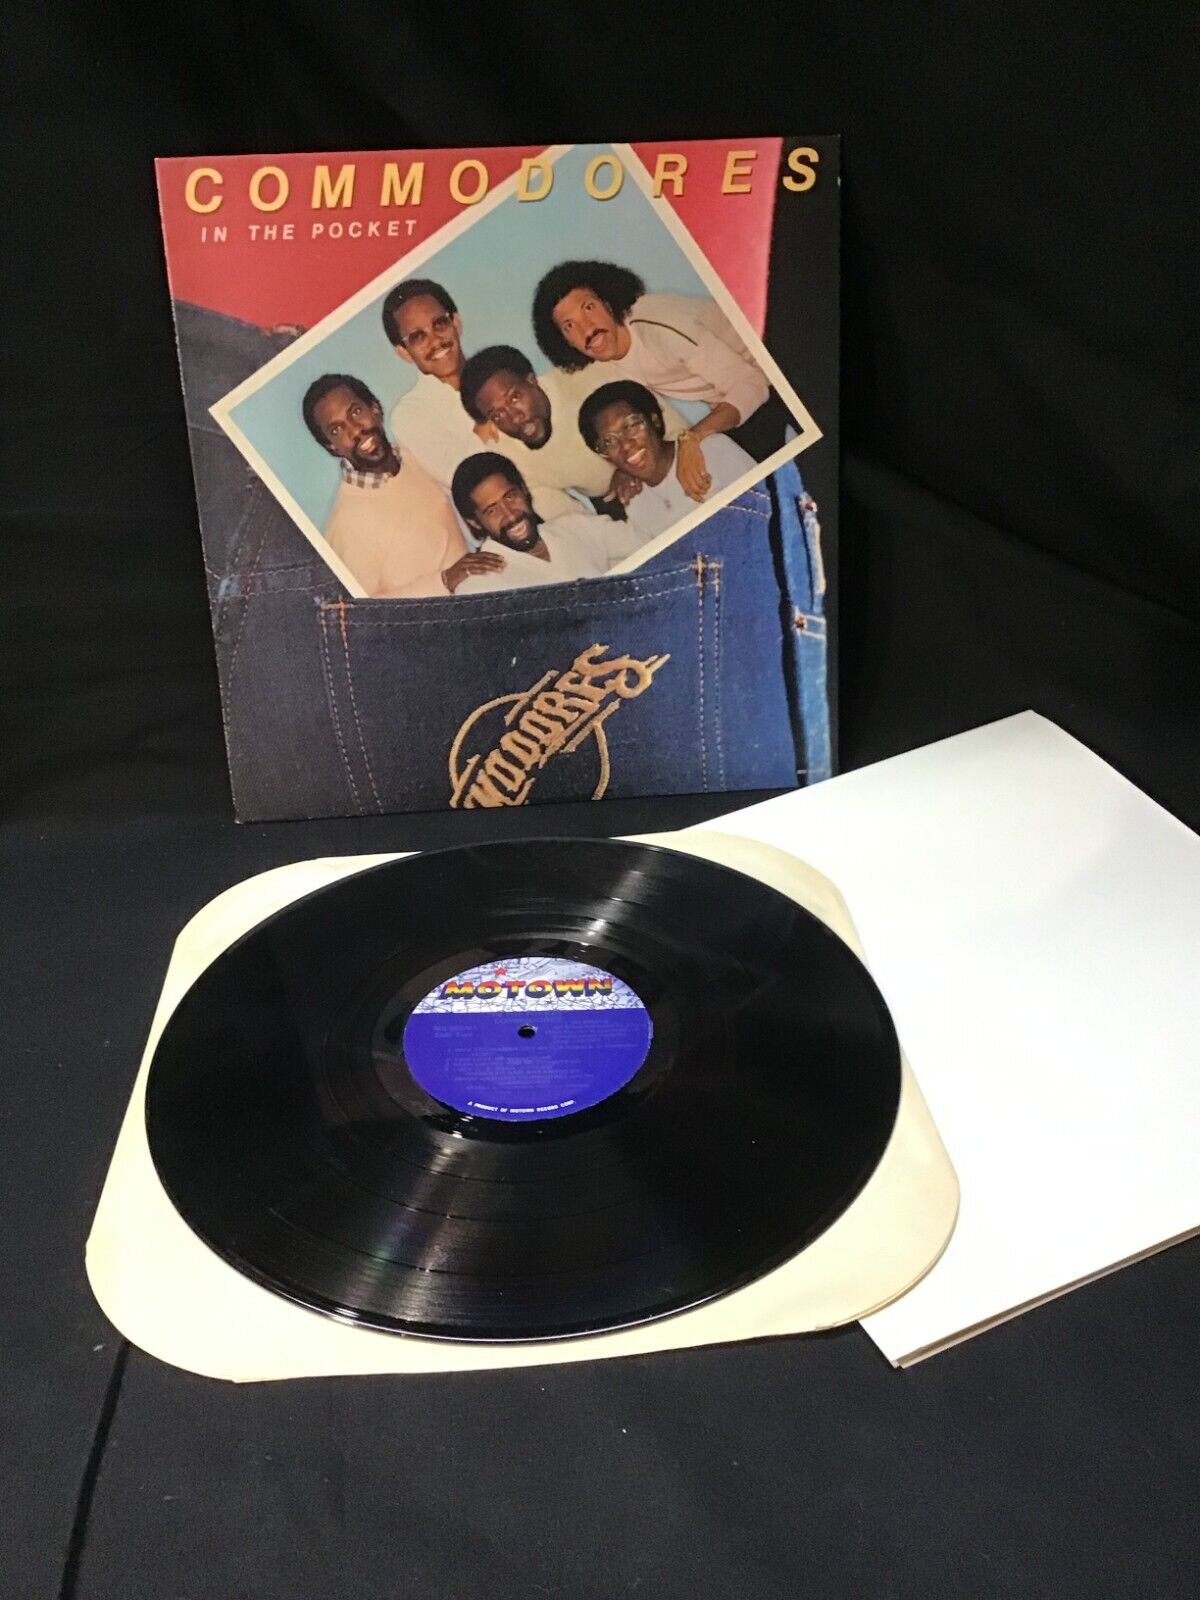 Vintage Vinyl LP Commodores In The Pocket w POSTER